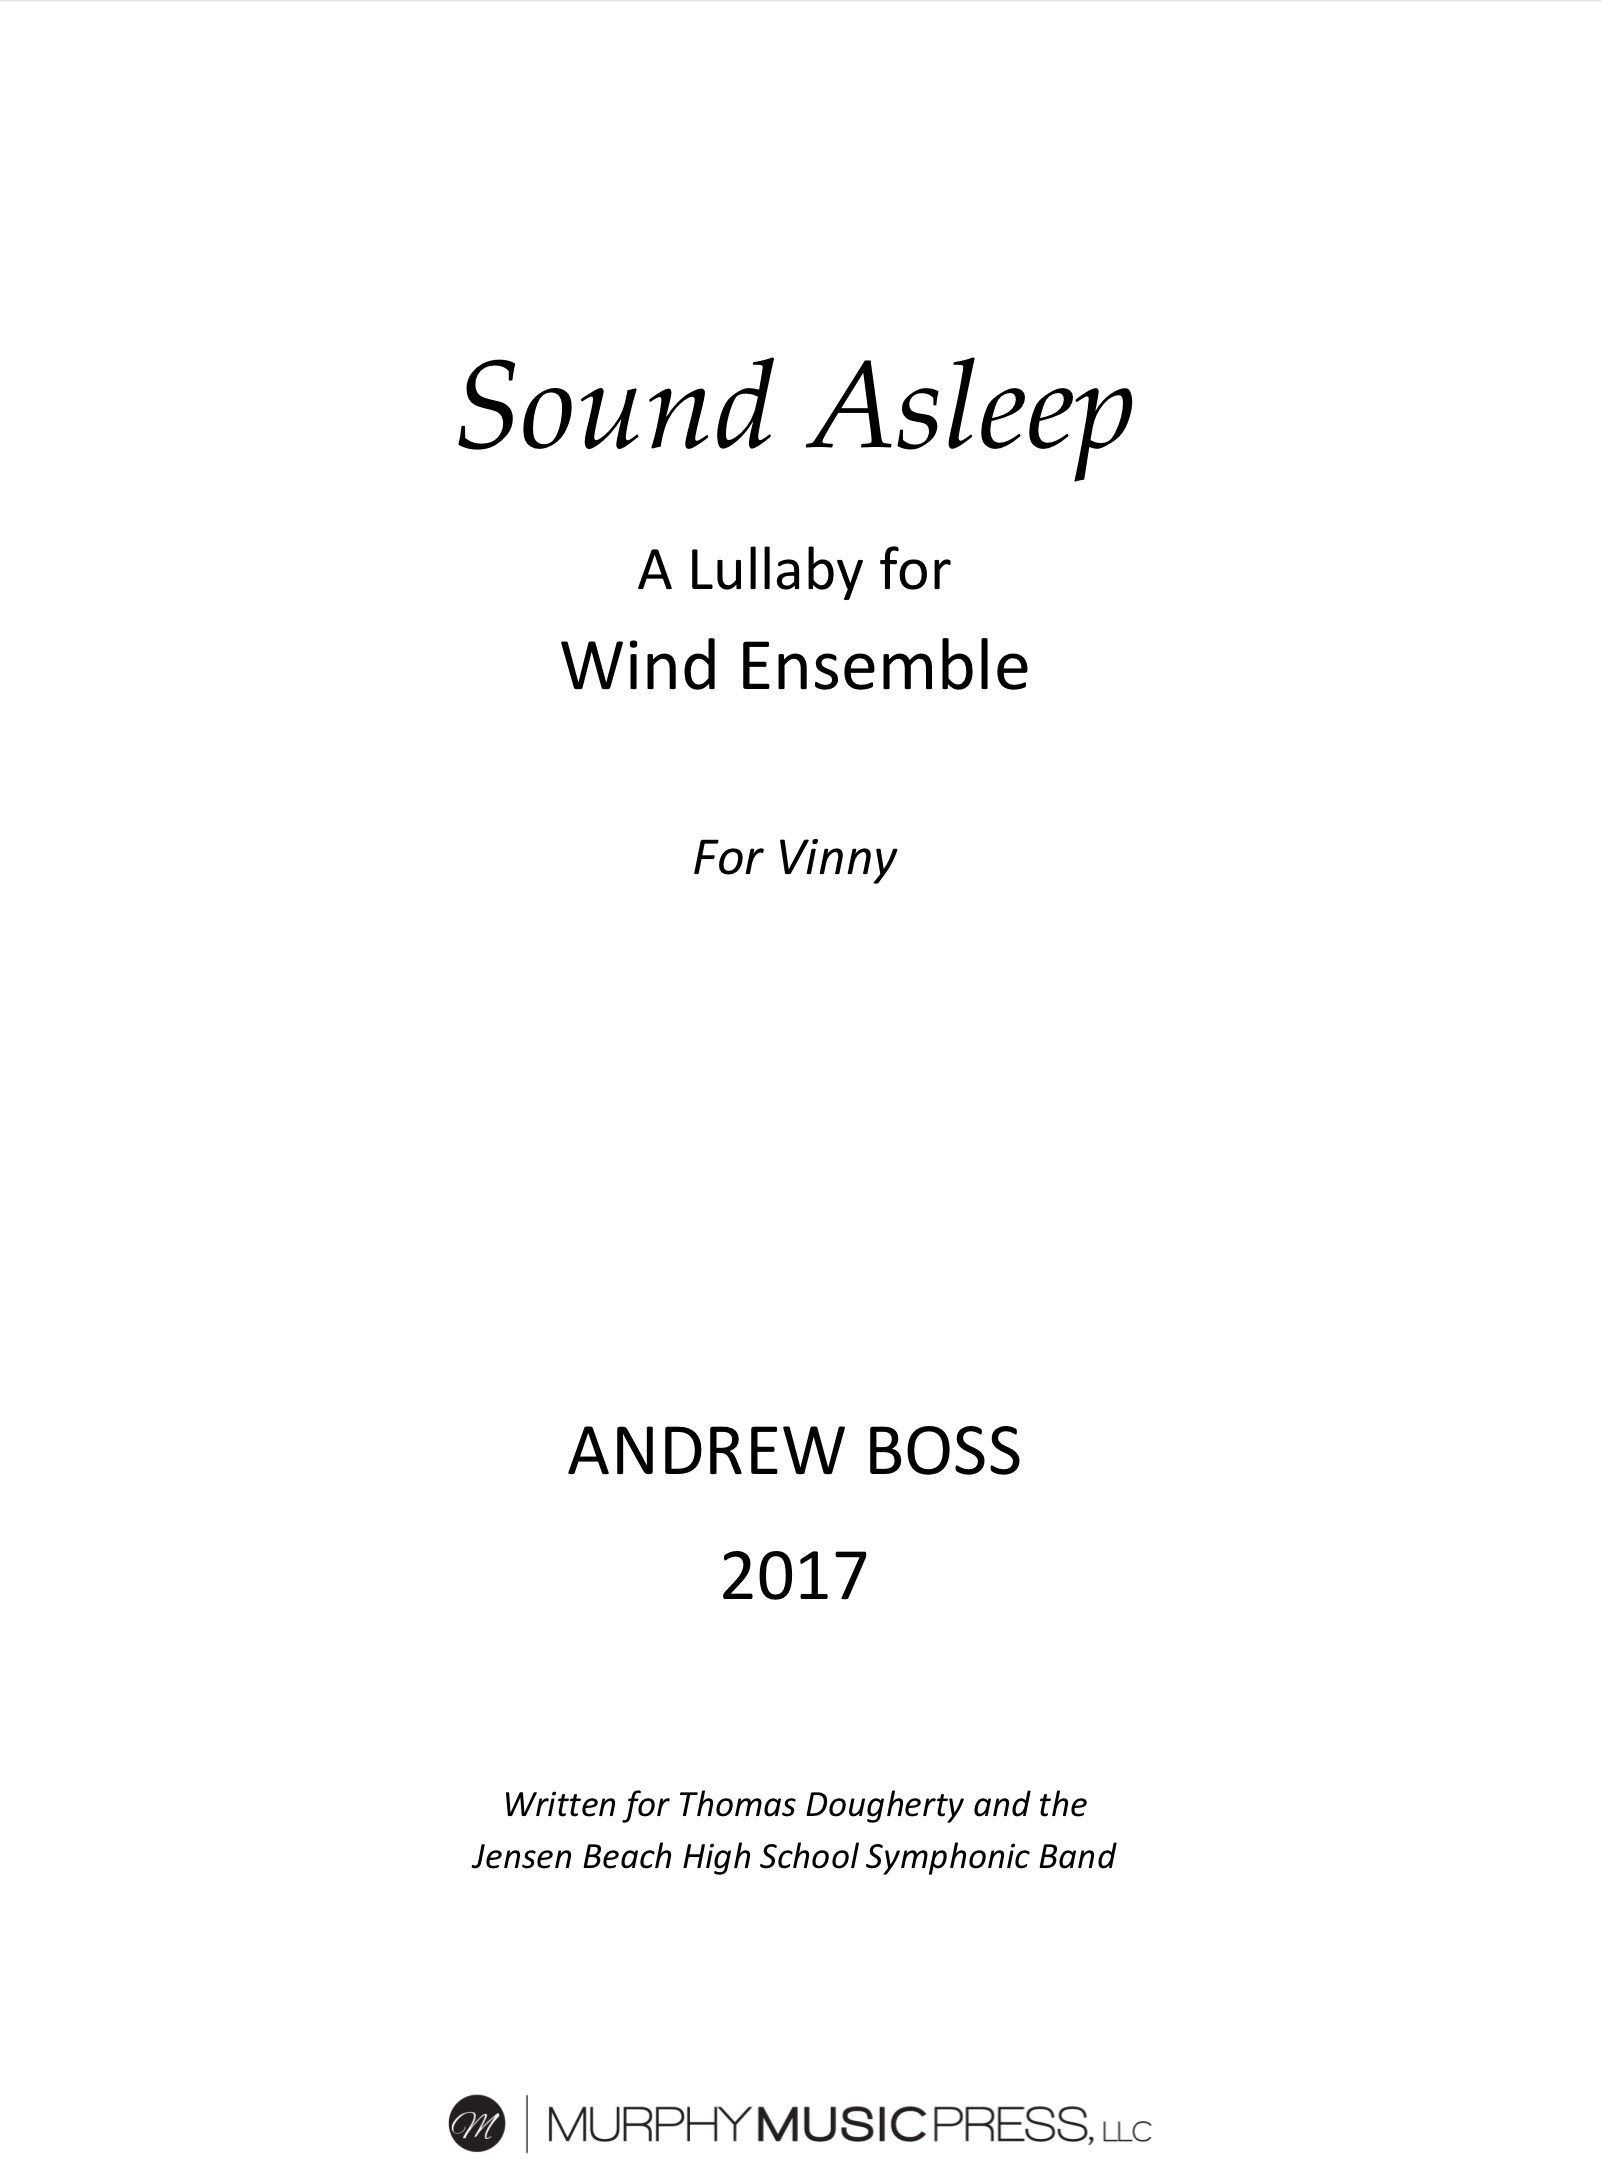 Sound Asleep (PDF Version) by Andrew Boss